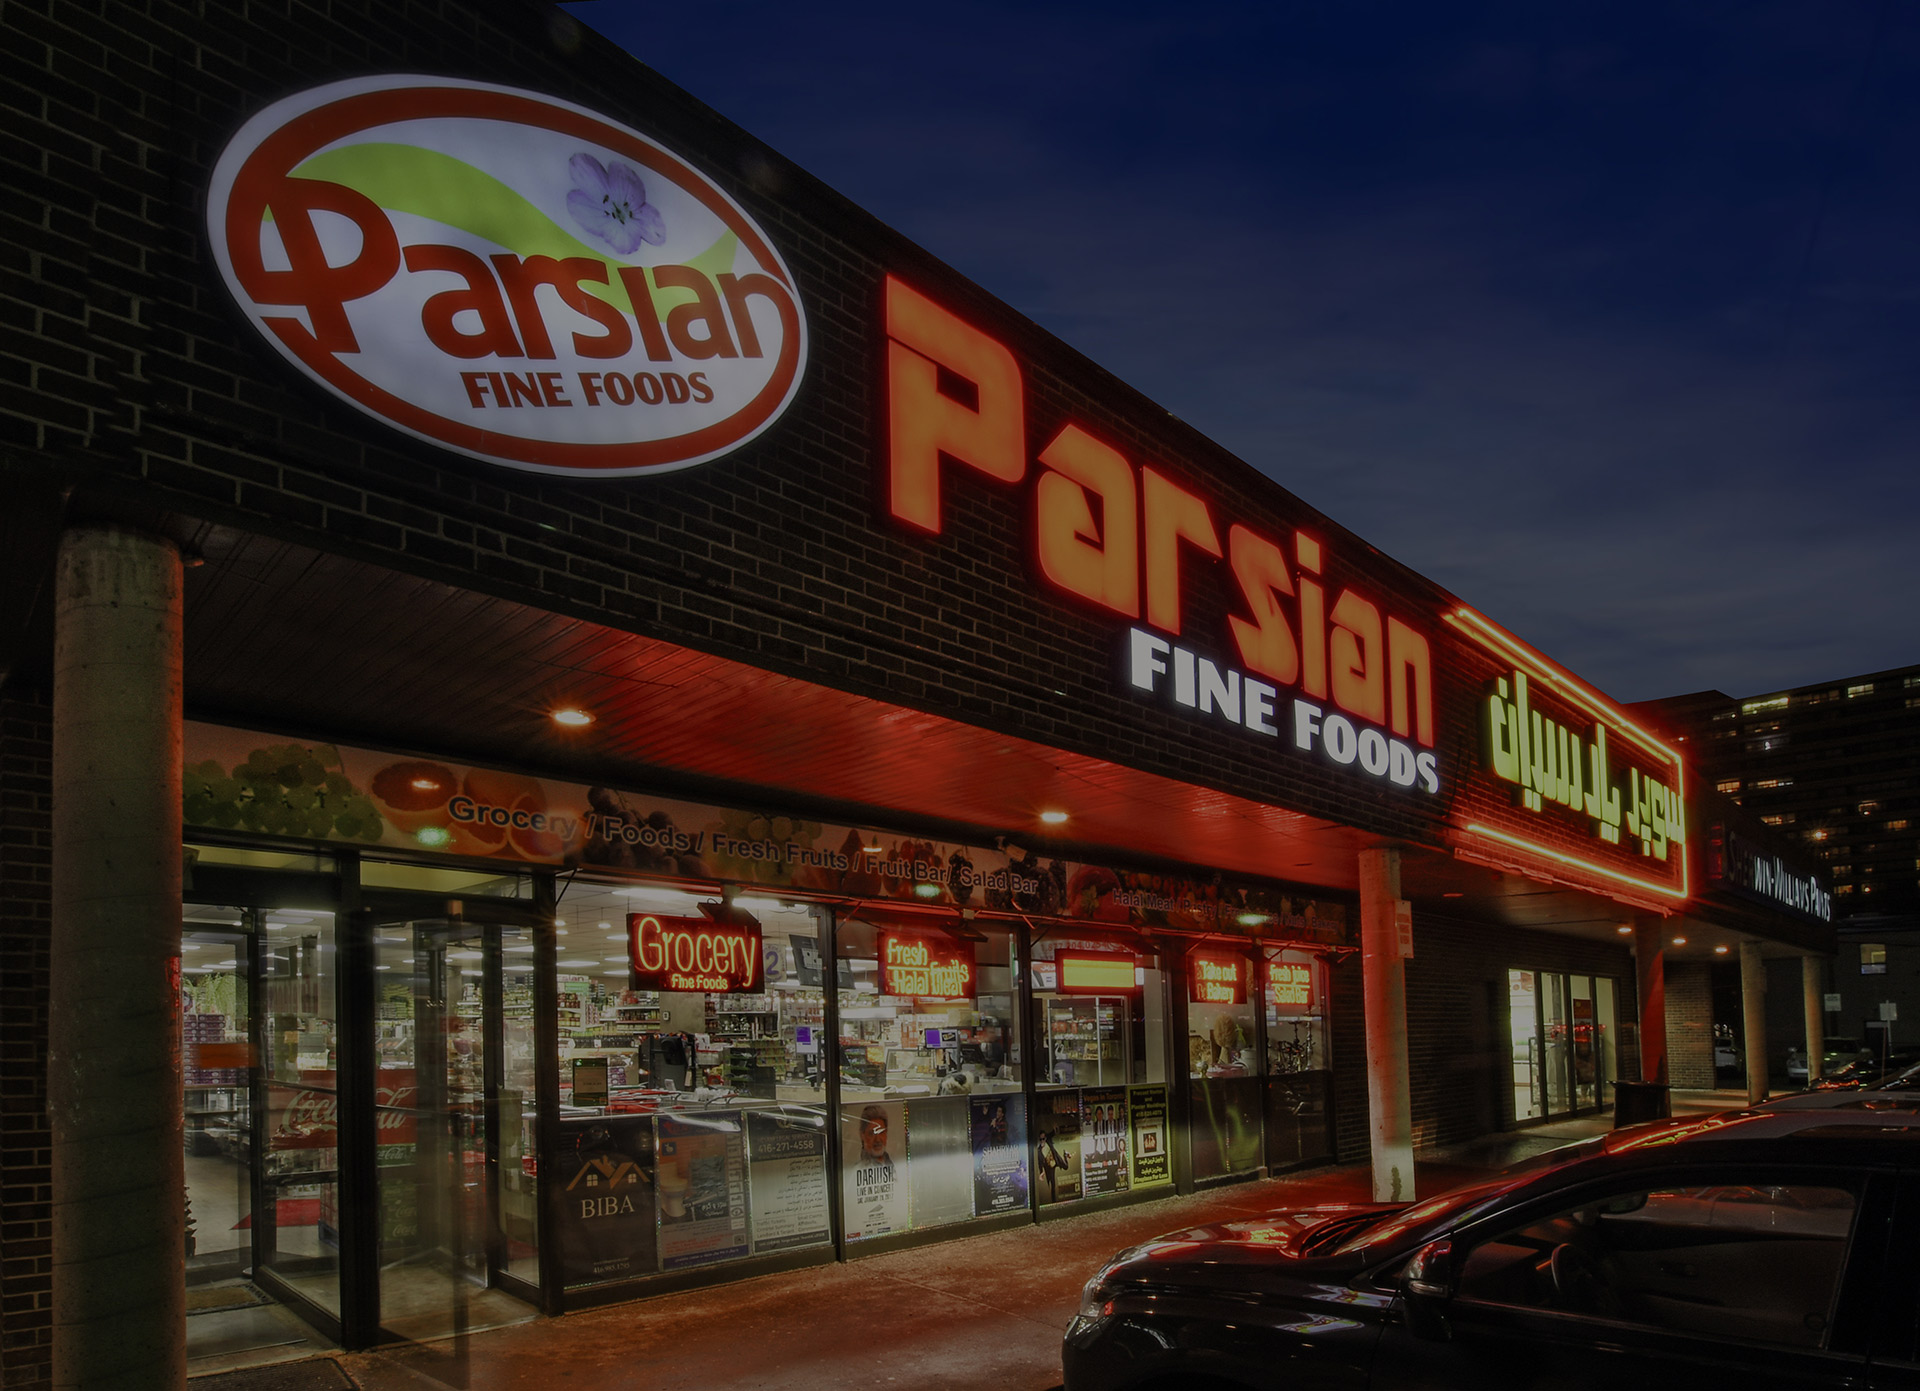 Super Parsian Grocery Store in Toronto